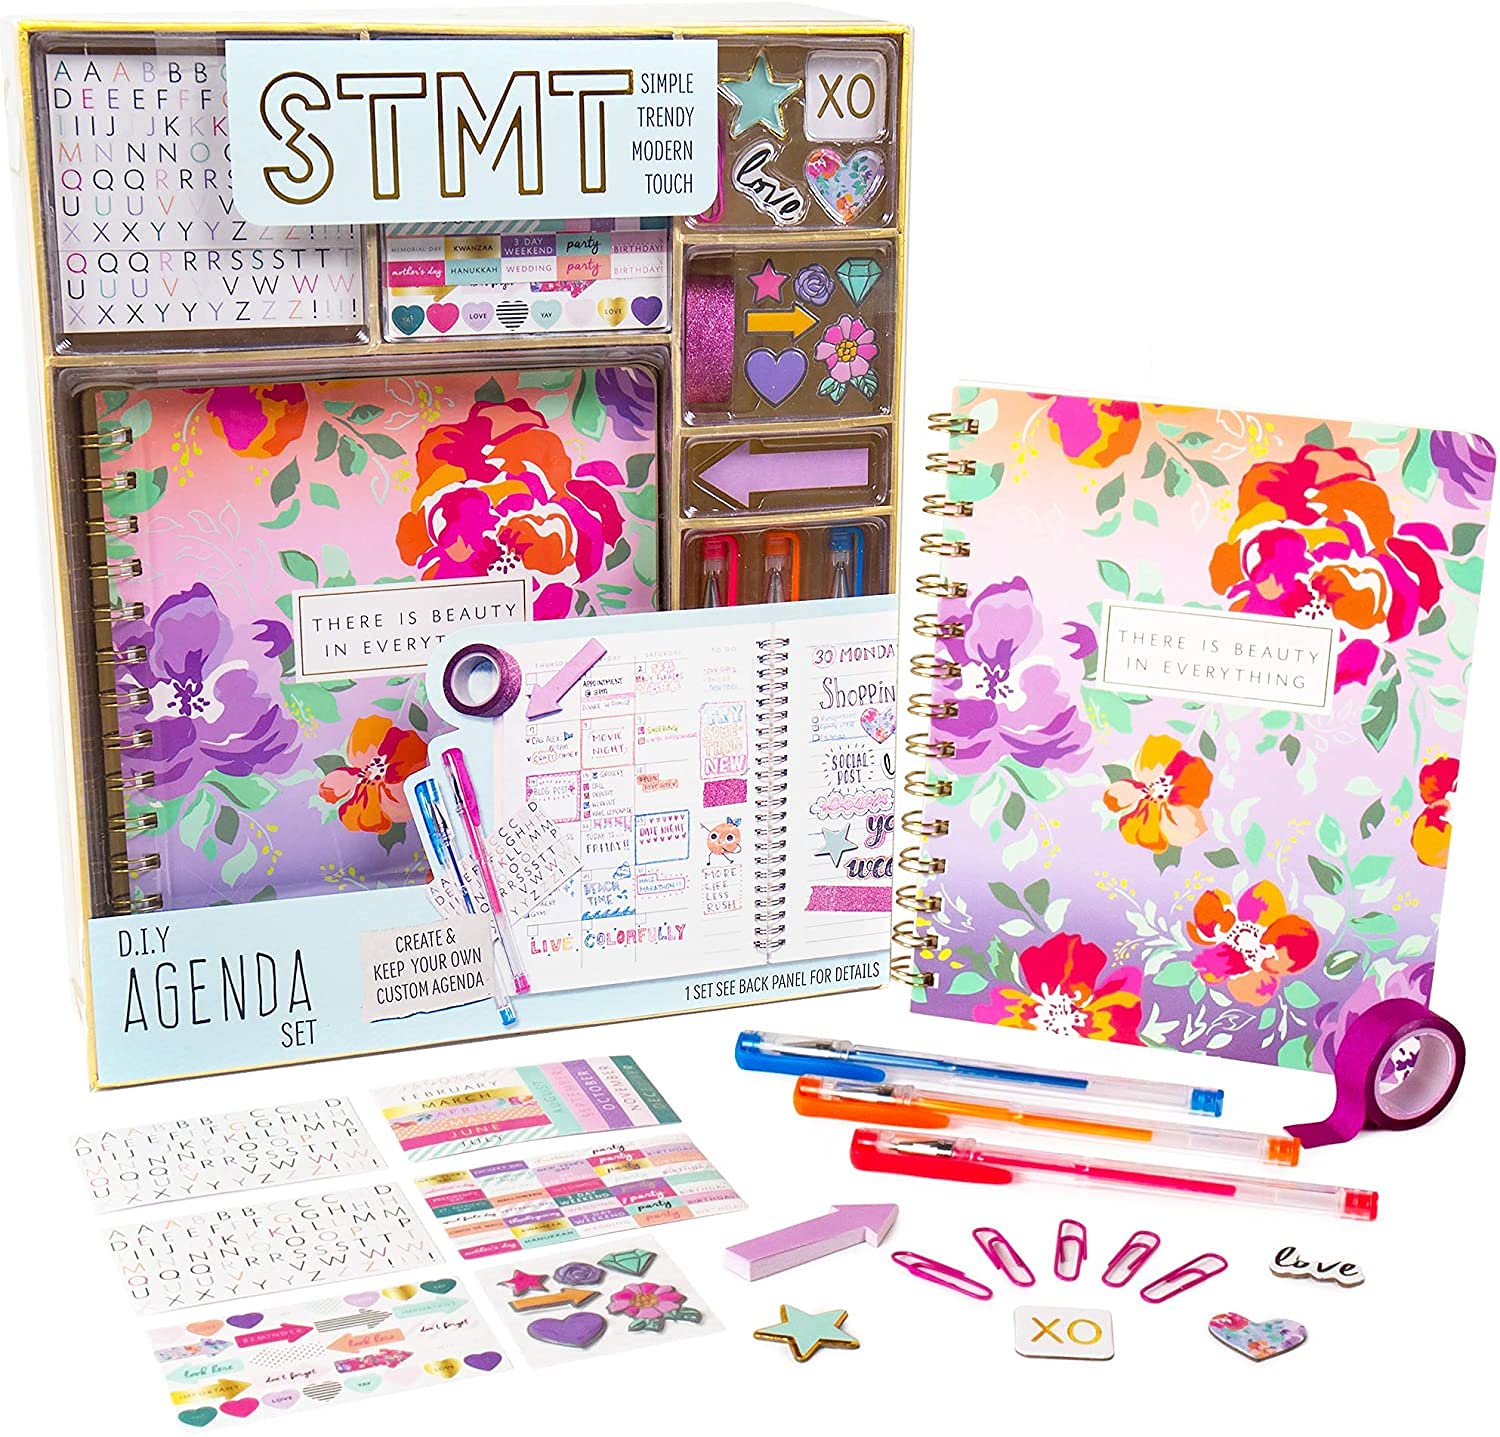 STMT DIY Journaling Set - Personalize & Decorate Your Planner/Organizer/Diary/Journal with Stickers, Gems, Glitter Frames & Clips, Bookmarks, Tassel Keychain - Great Gift Idea for Women and Teen Girls